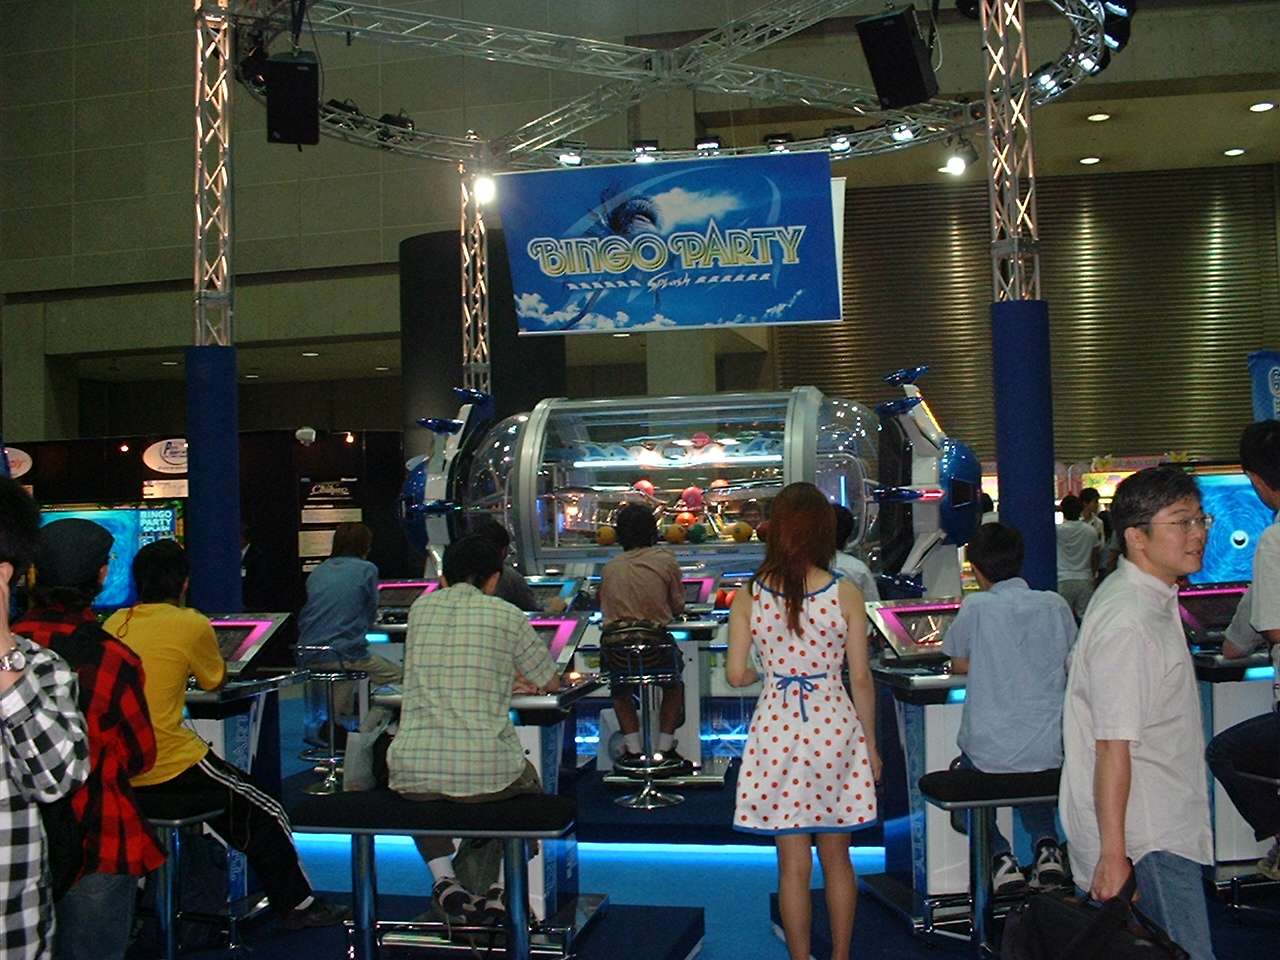 people sit on stools around a large area game called bingo party